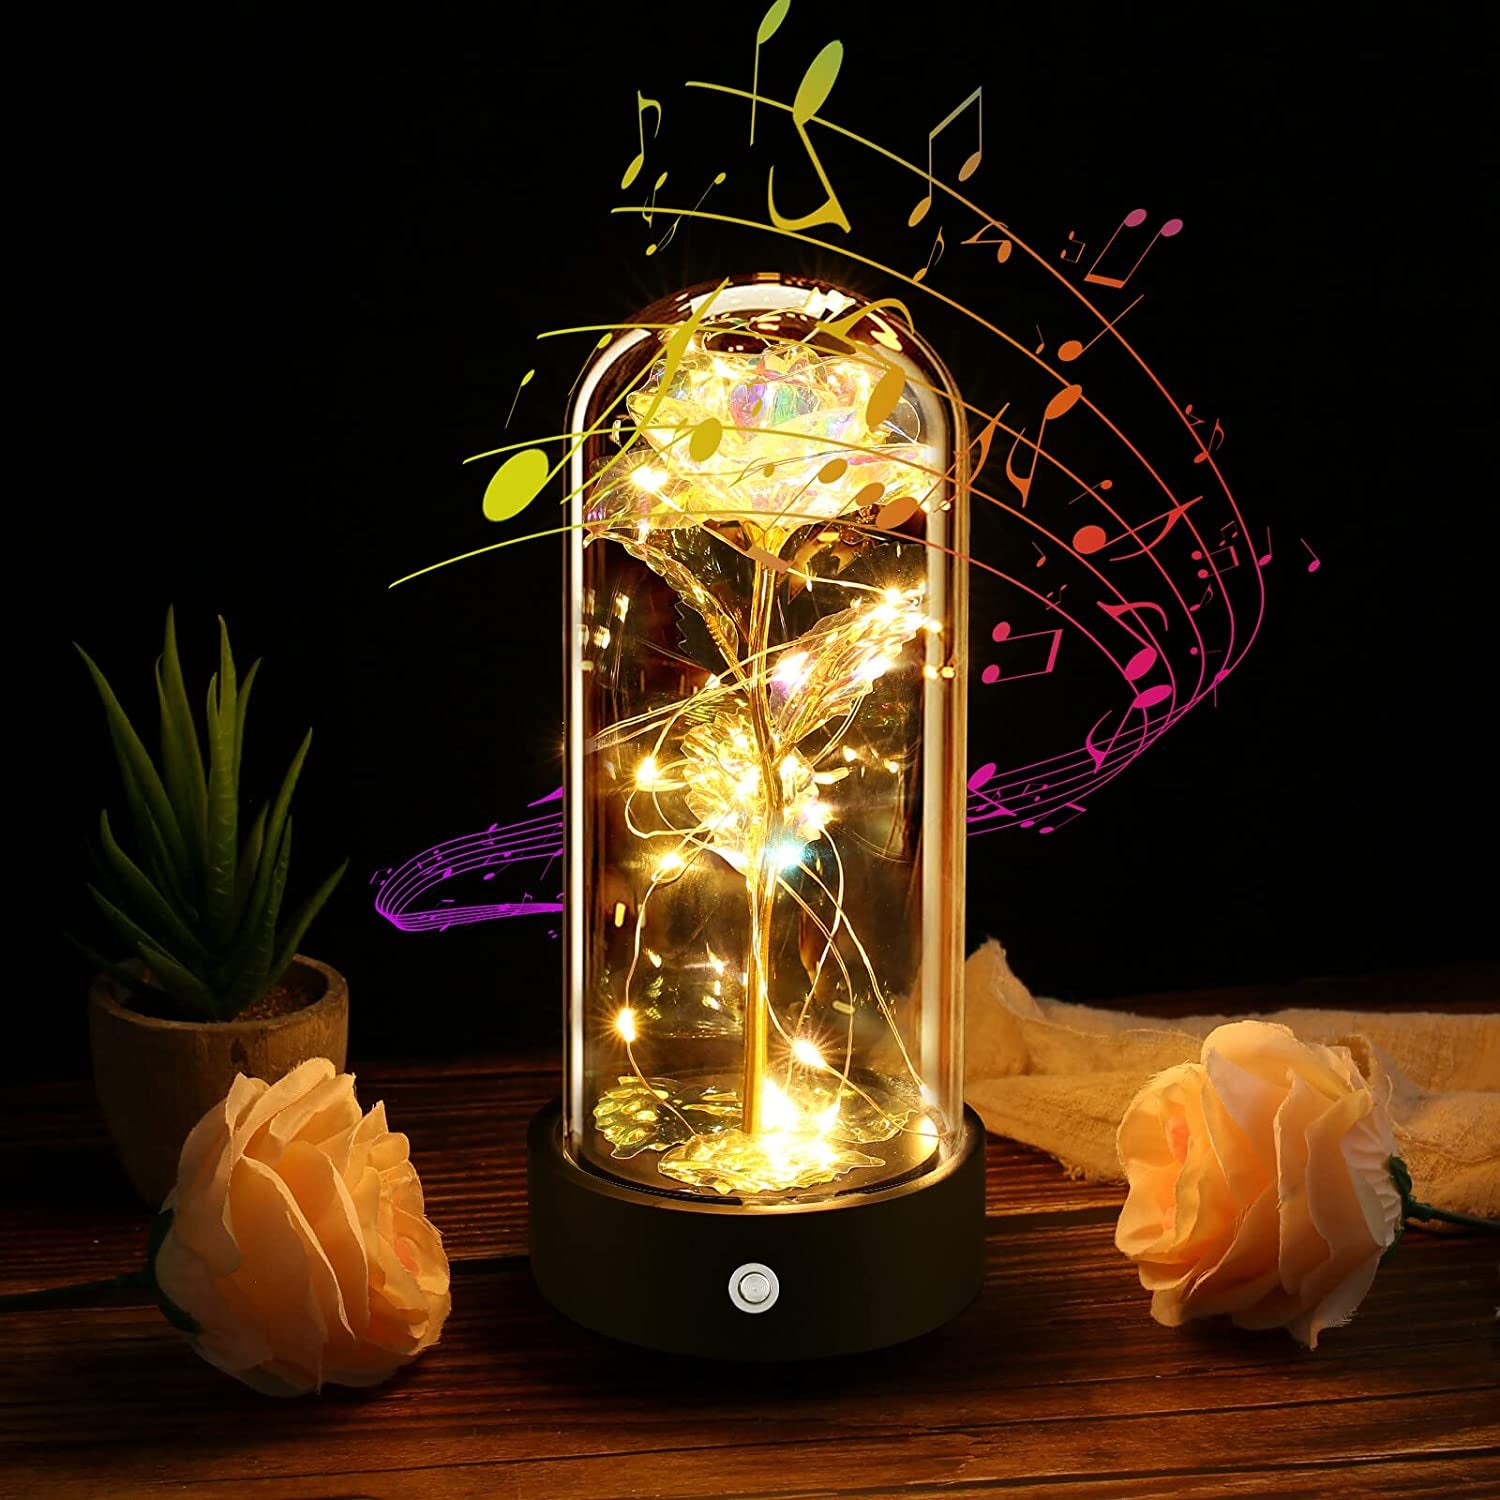 Christmas Rose Gifts for Women, Beauty and the Beast Galaxy Enchanted Rose Music Box, Forever Flower Gifts for Mom Wife Girlfriend Grandma, Personalized Anniversary Presents LED Rose in Glass Dome